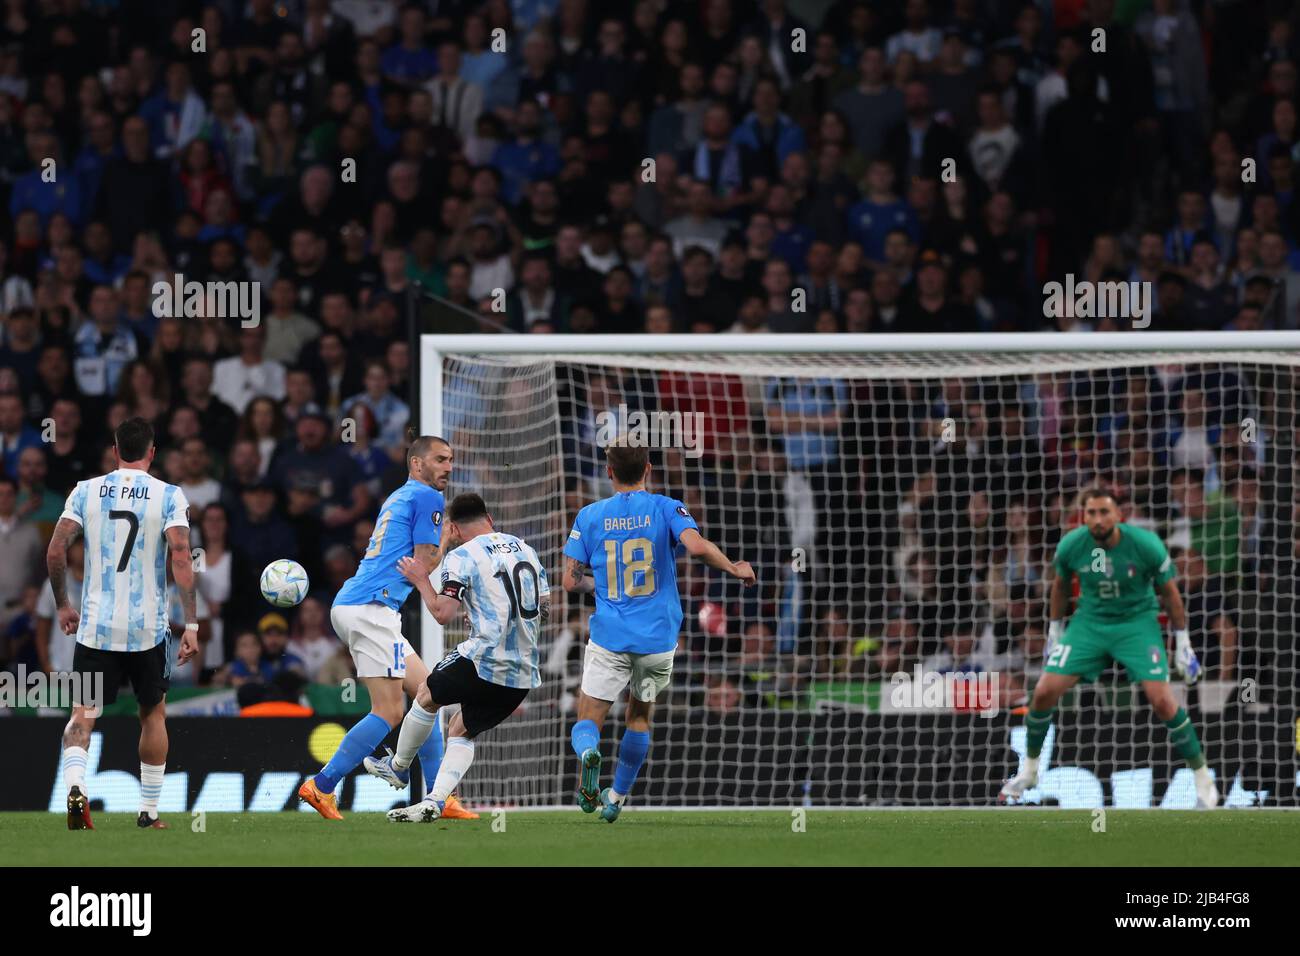 London, England, 1st June 2022. Rodrigo De Paul of Argentina looks on as team mate Lionel Messi curls a shot around Leonardo Bonucci of Italy that was subsequently saved by Gianluigi Donnarumma of Italy during the CONMEBOL-UEFA Cup of Champions match at Wembley Stadium, London. Picture credit should read: Jonathan Moscrop / Sportimage Credit: Sportimage/Alamy Live News Stock Photo